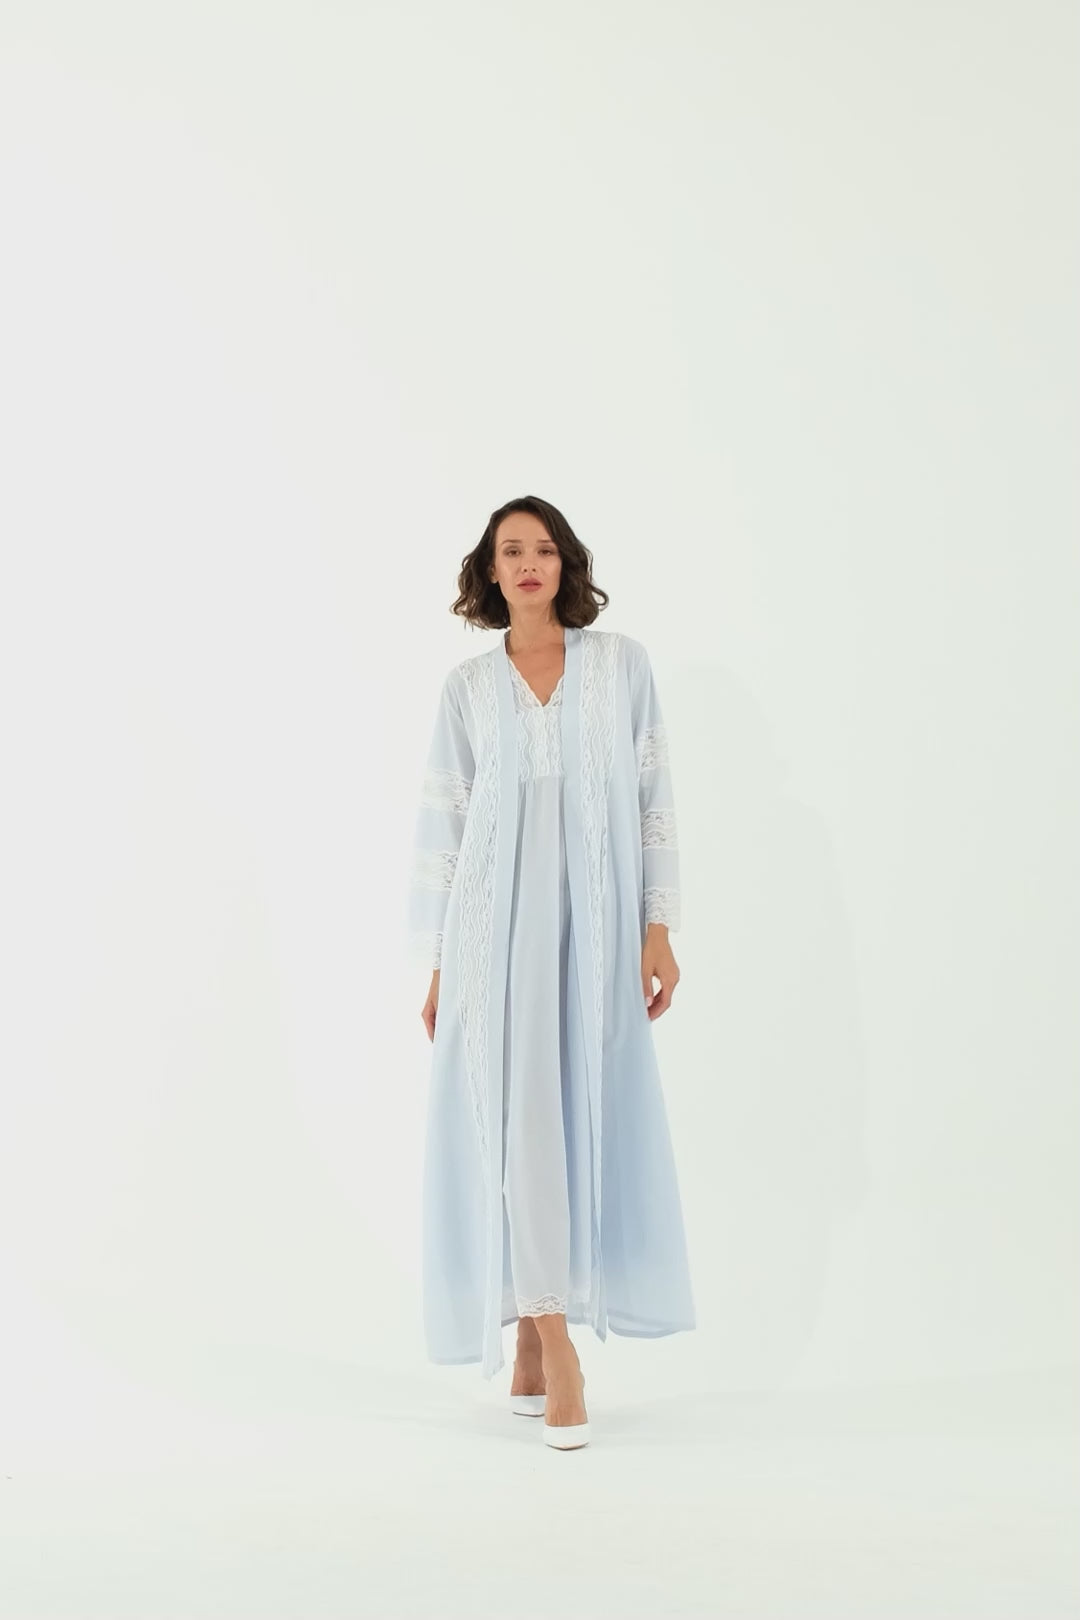 Leilani Trimmed Cotton Voile Long Sleeve Robe Set - Baby Blue